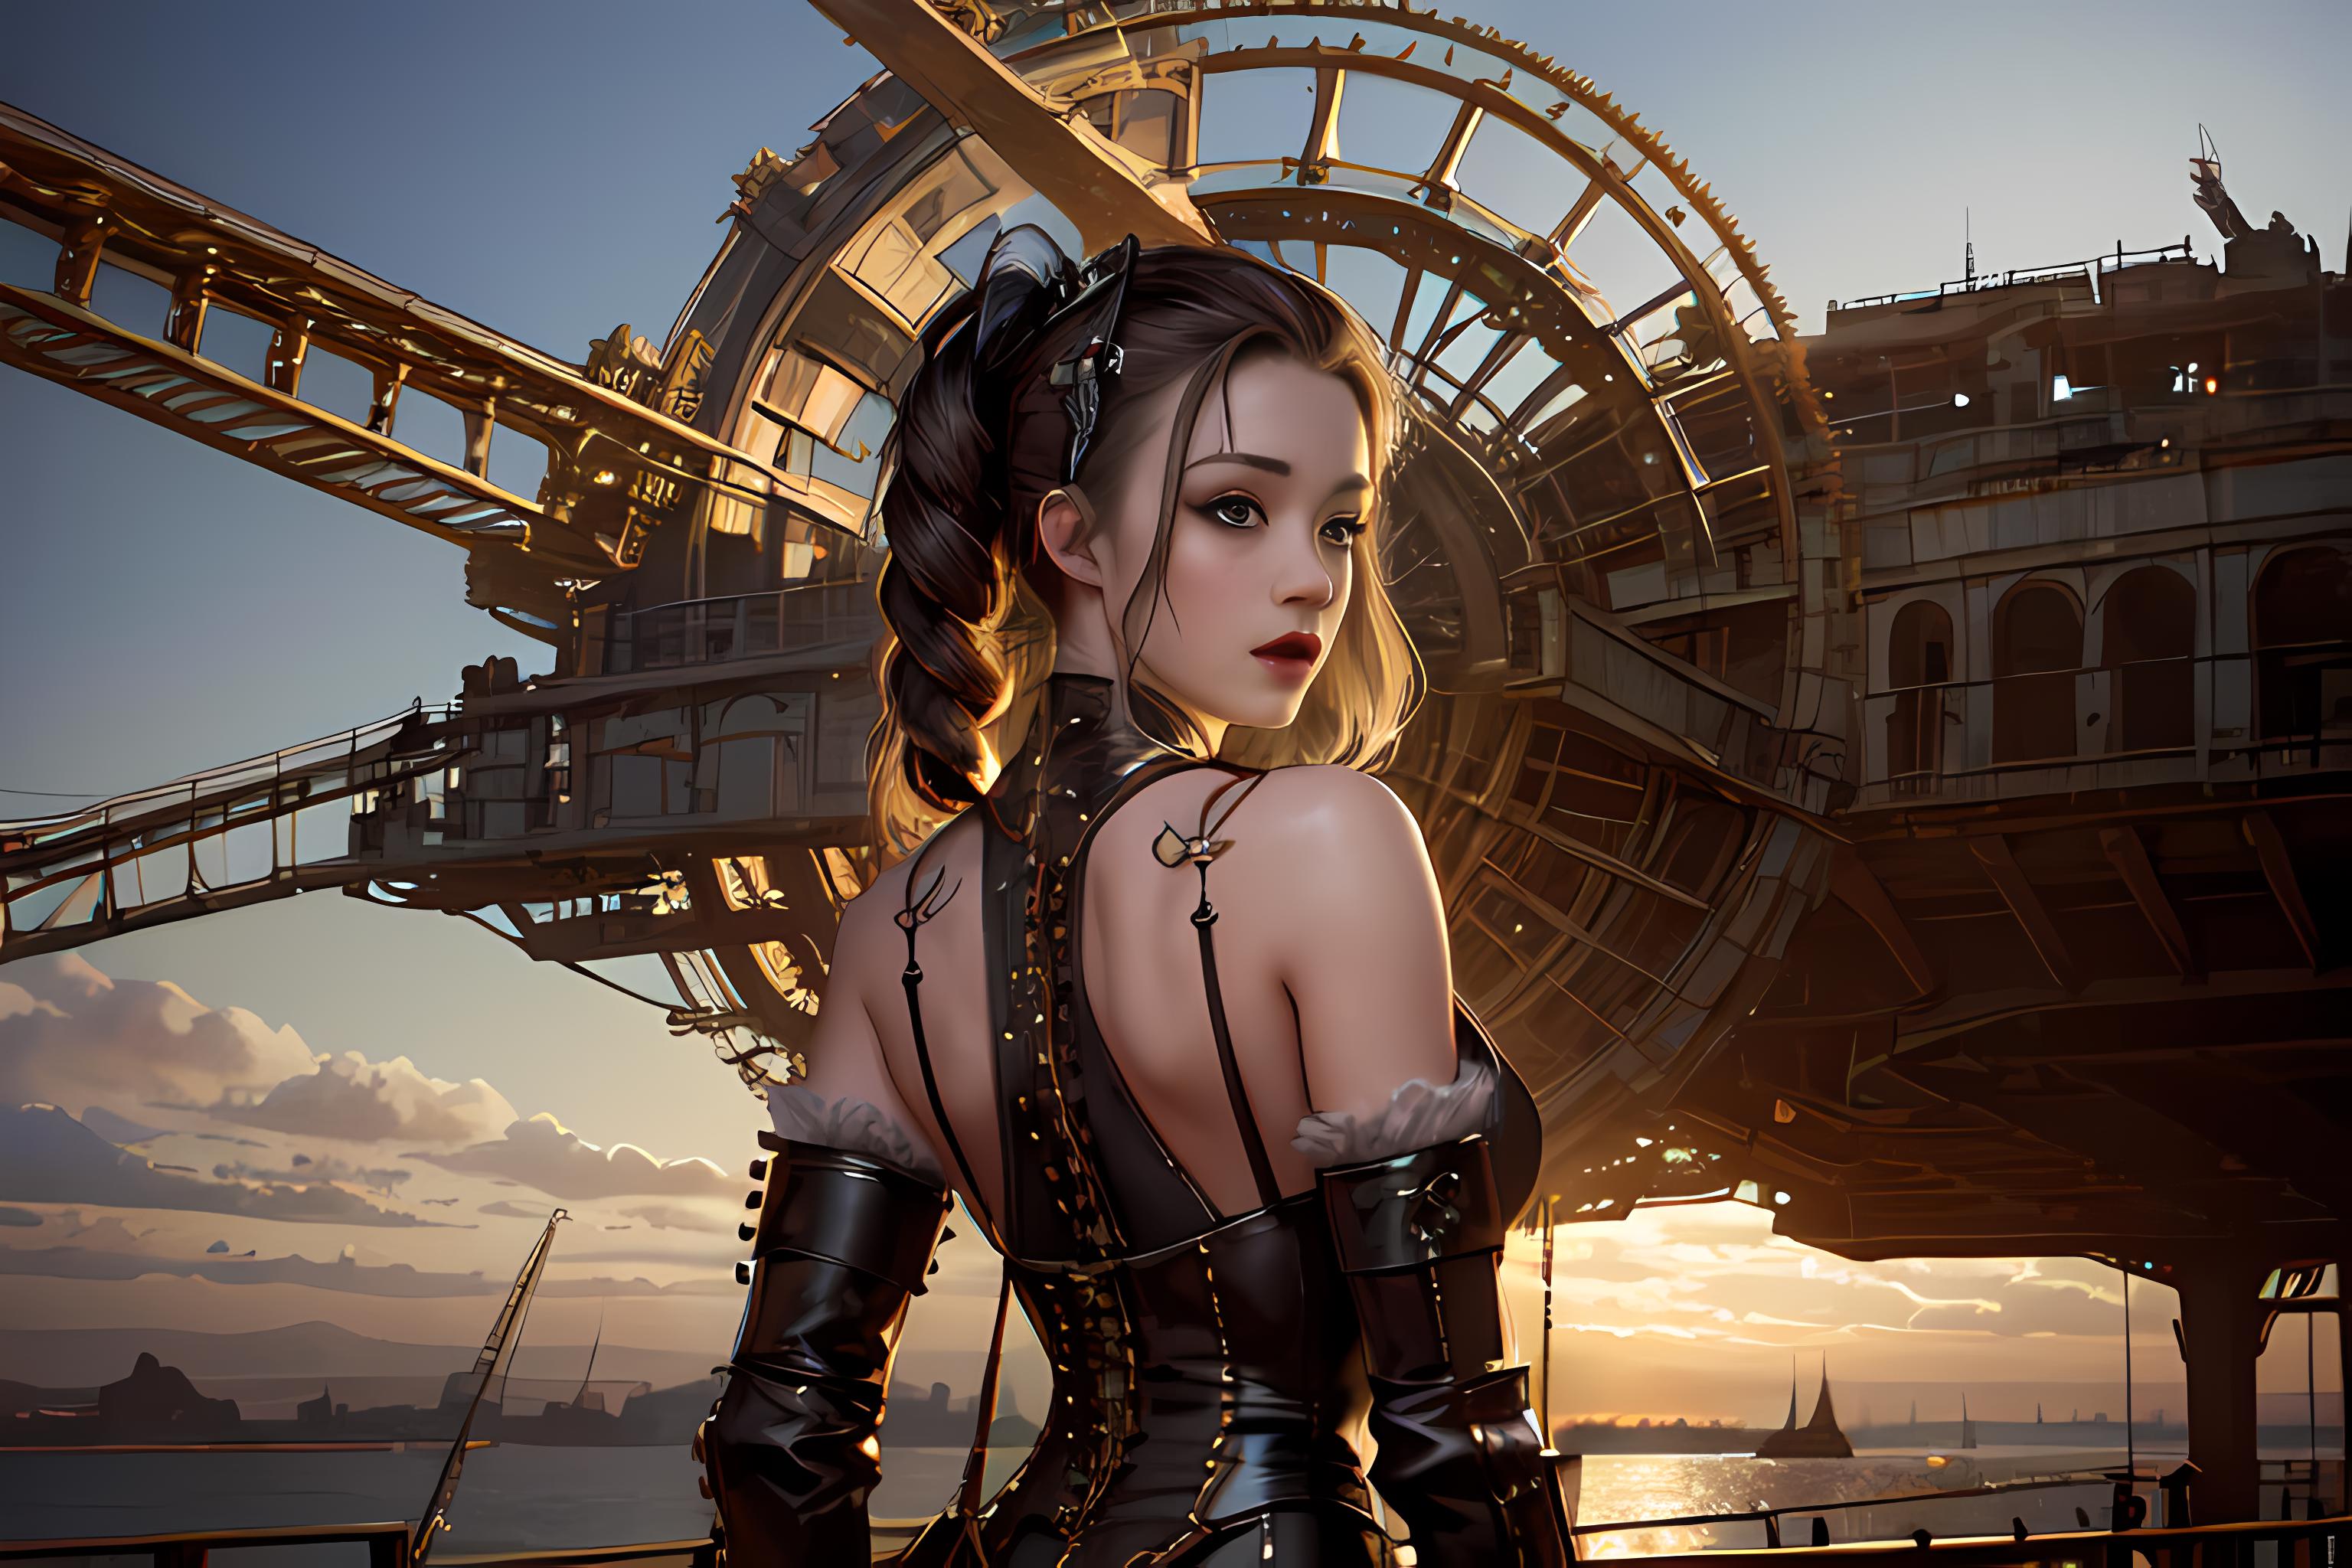 Steampunk REDONE - konyconi image by TheVincent